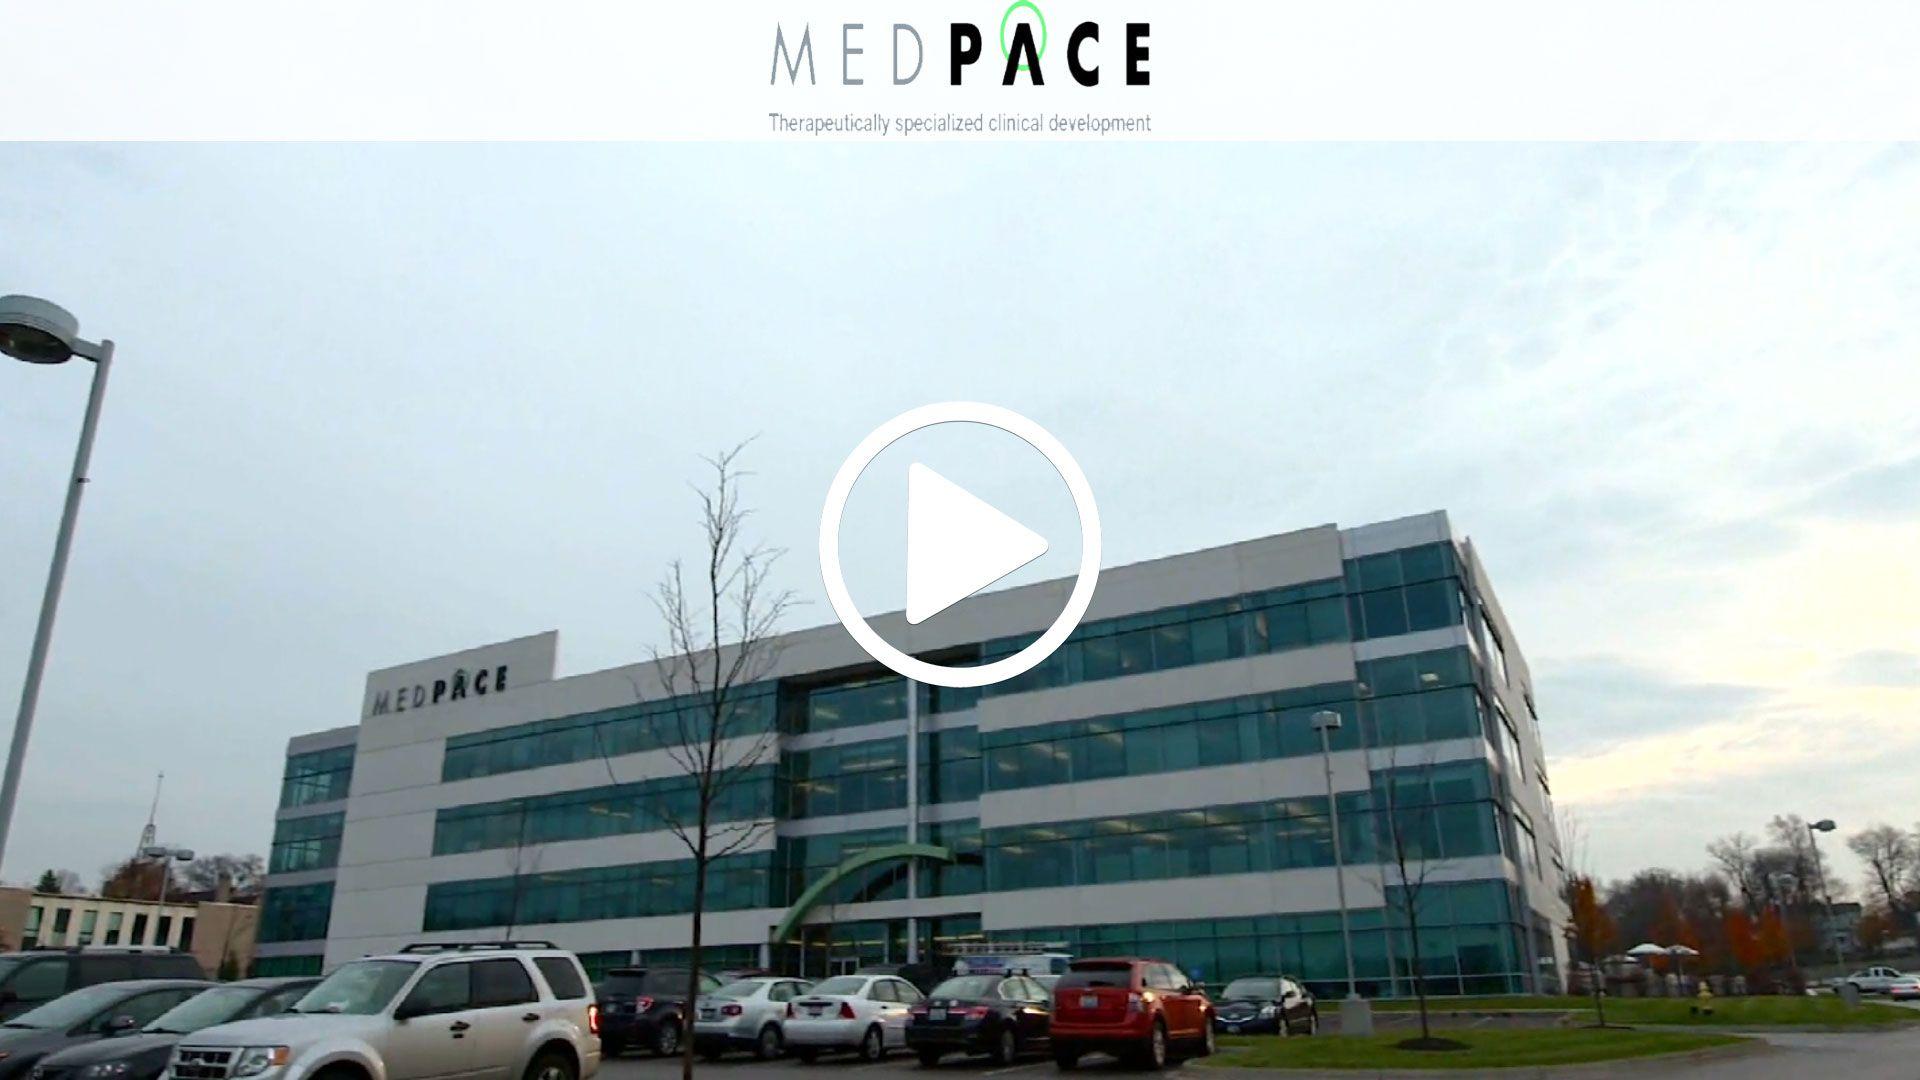 Medpace Logo - Clinical Research Associate - Medpace - Video Hosted by Digi-Me